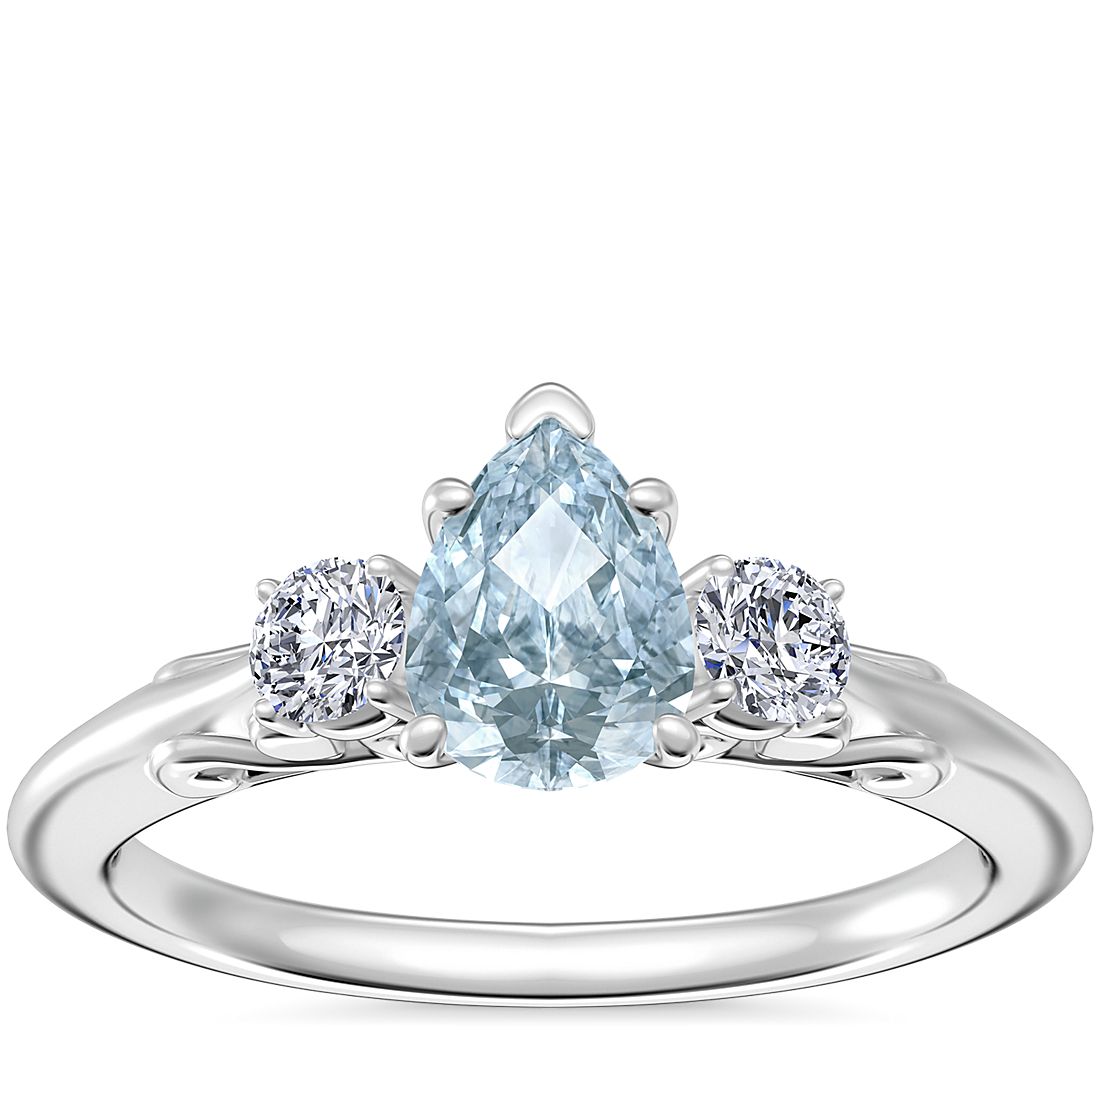 Vintage Three Stone Engagement Ring with Pear-Shaped Aquamarine in Platinum (7x5mm)